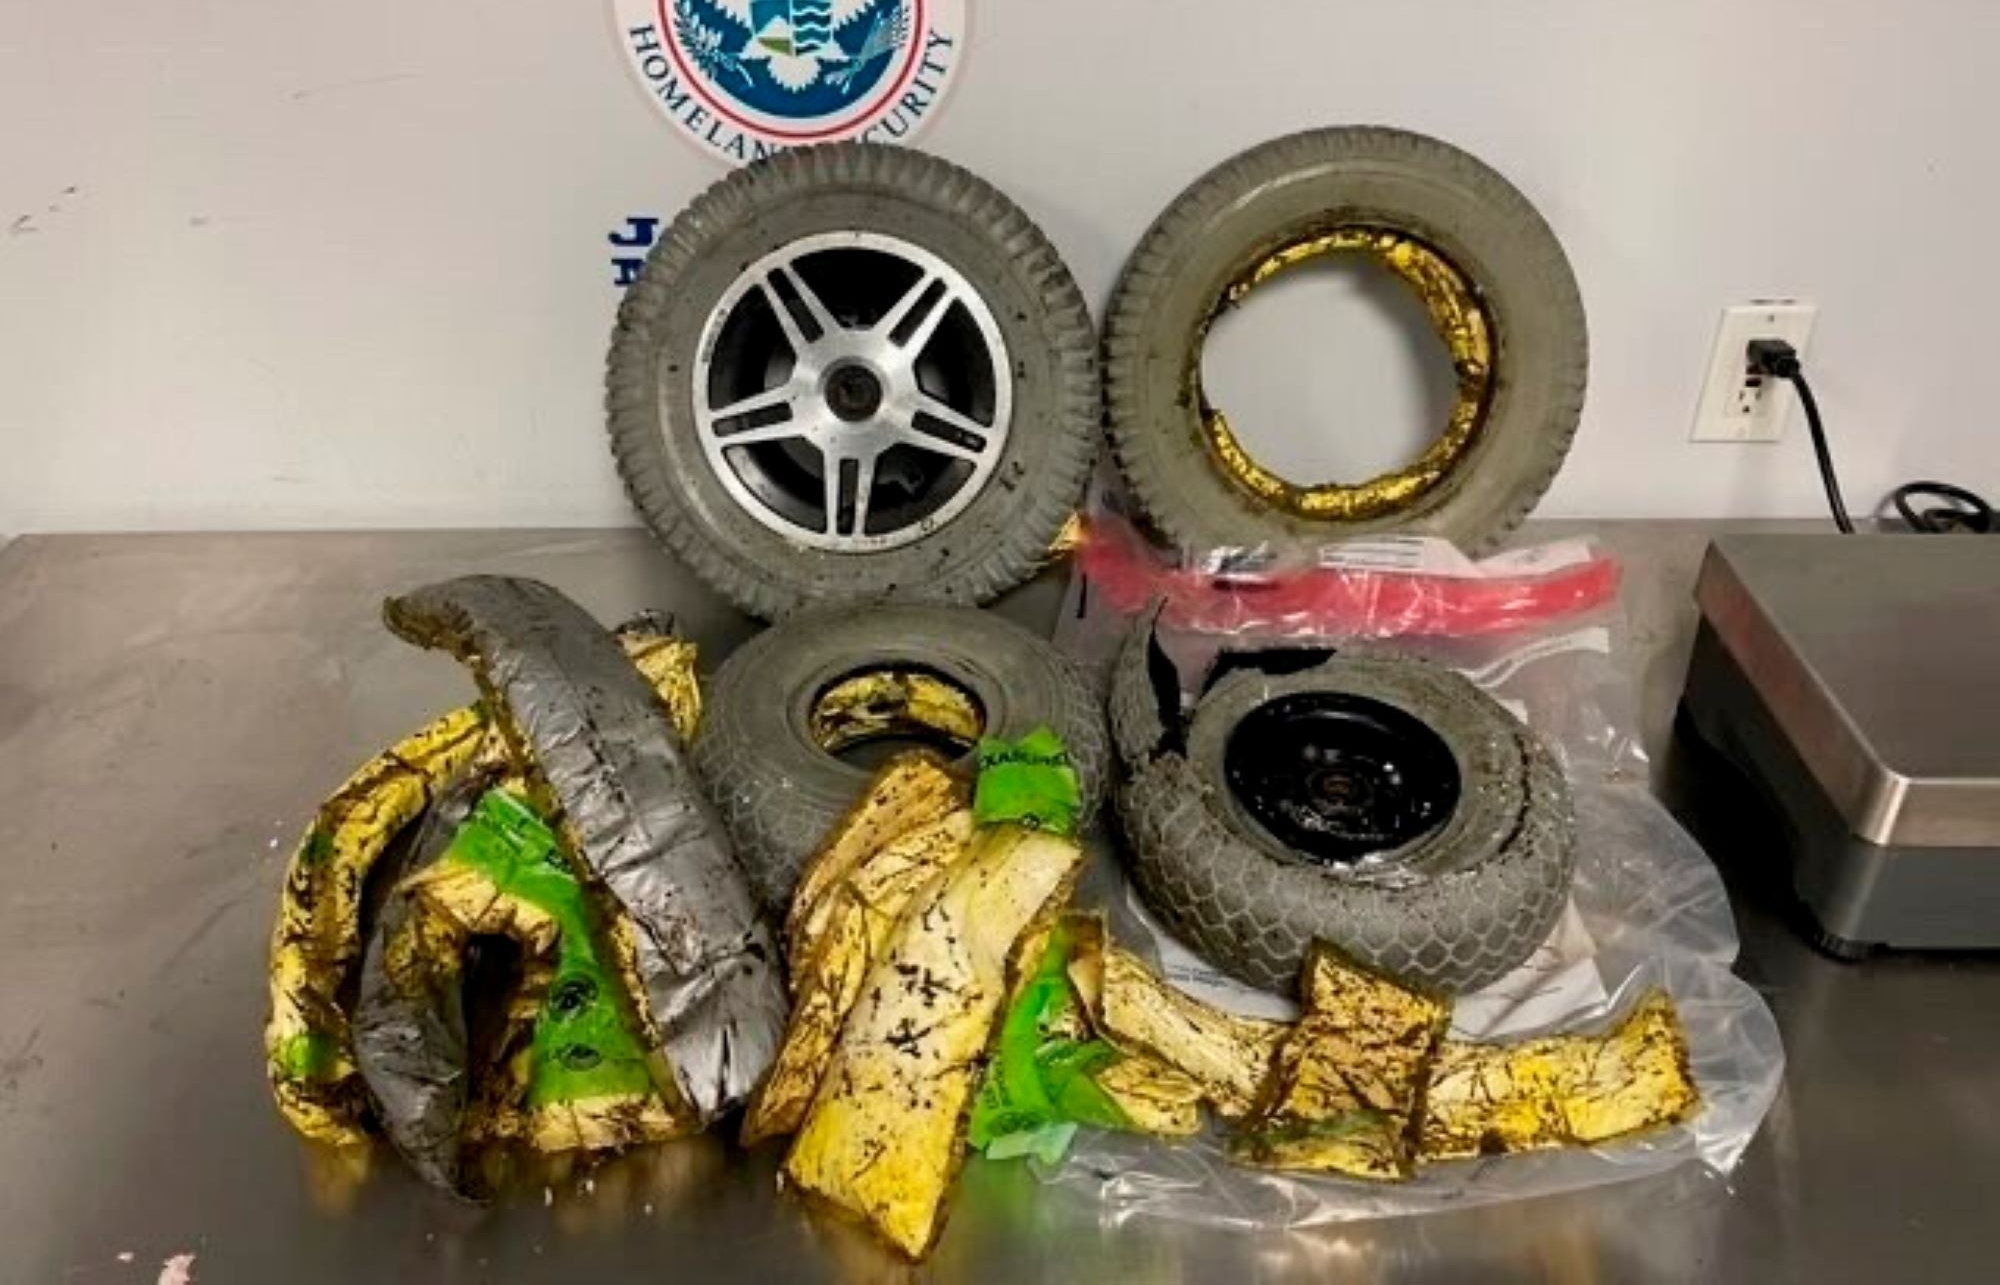 Feds: Cocaine Worth $450,000 Seized From Wheelchair Wheels